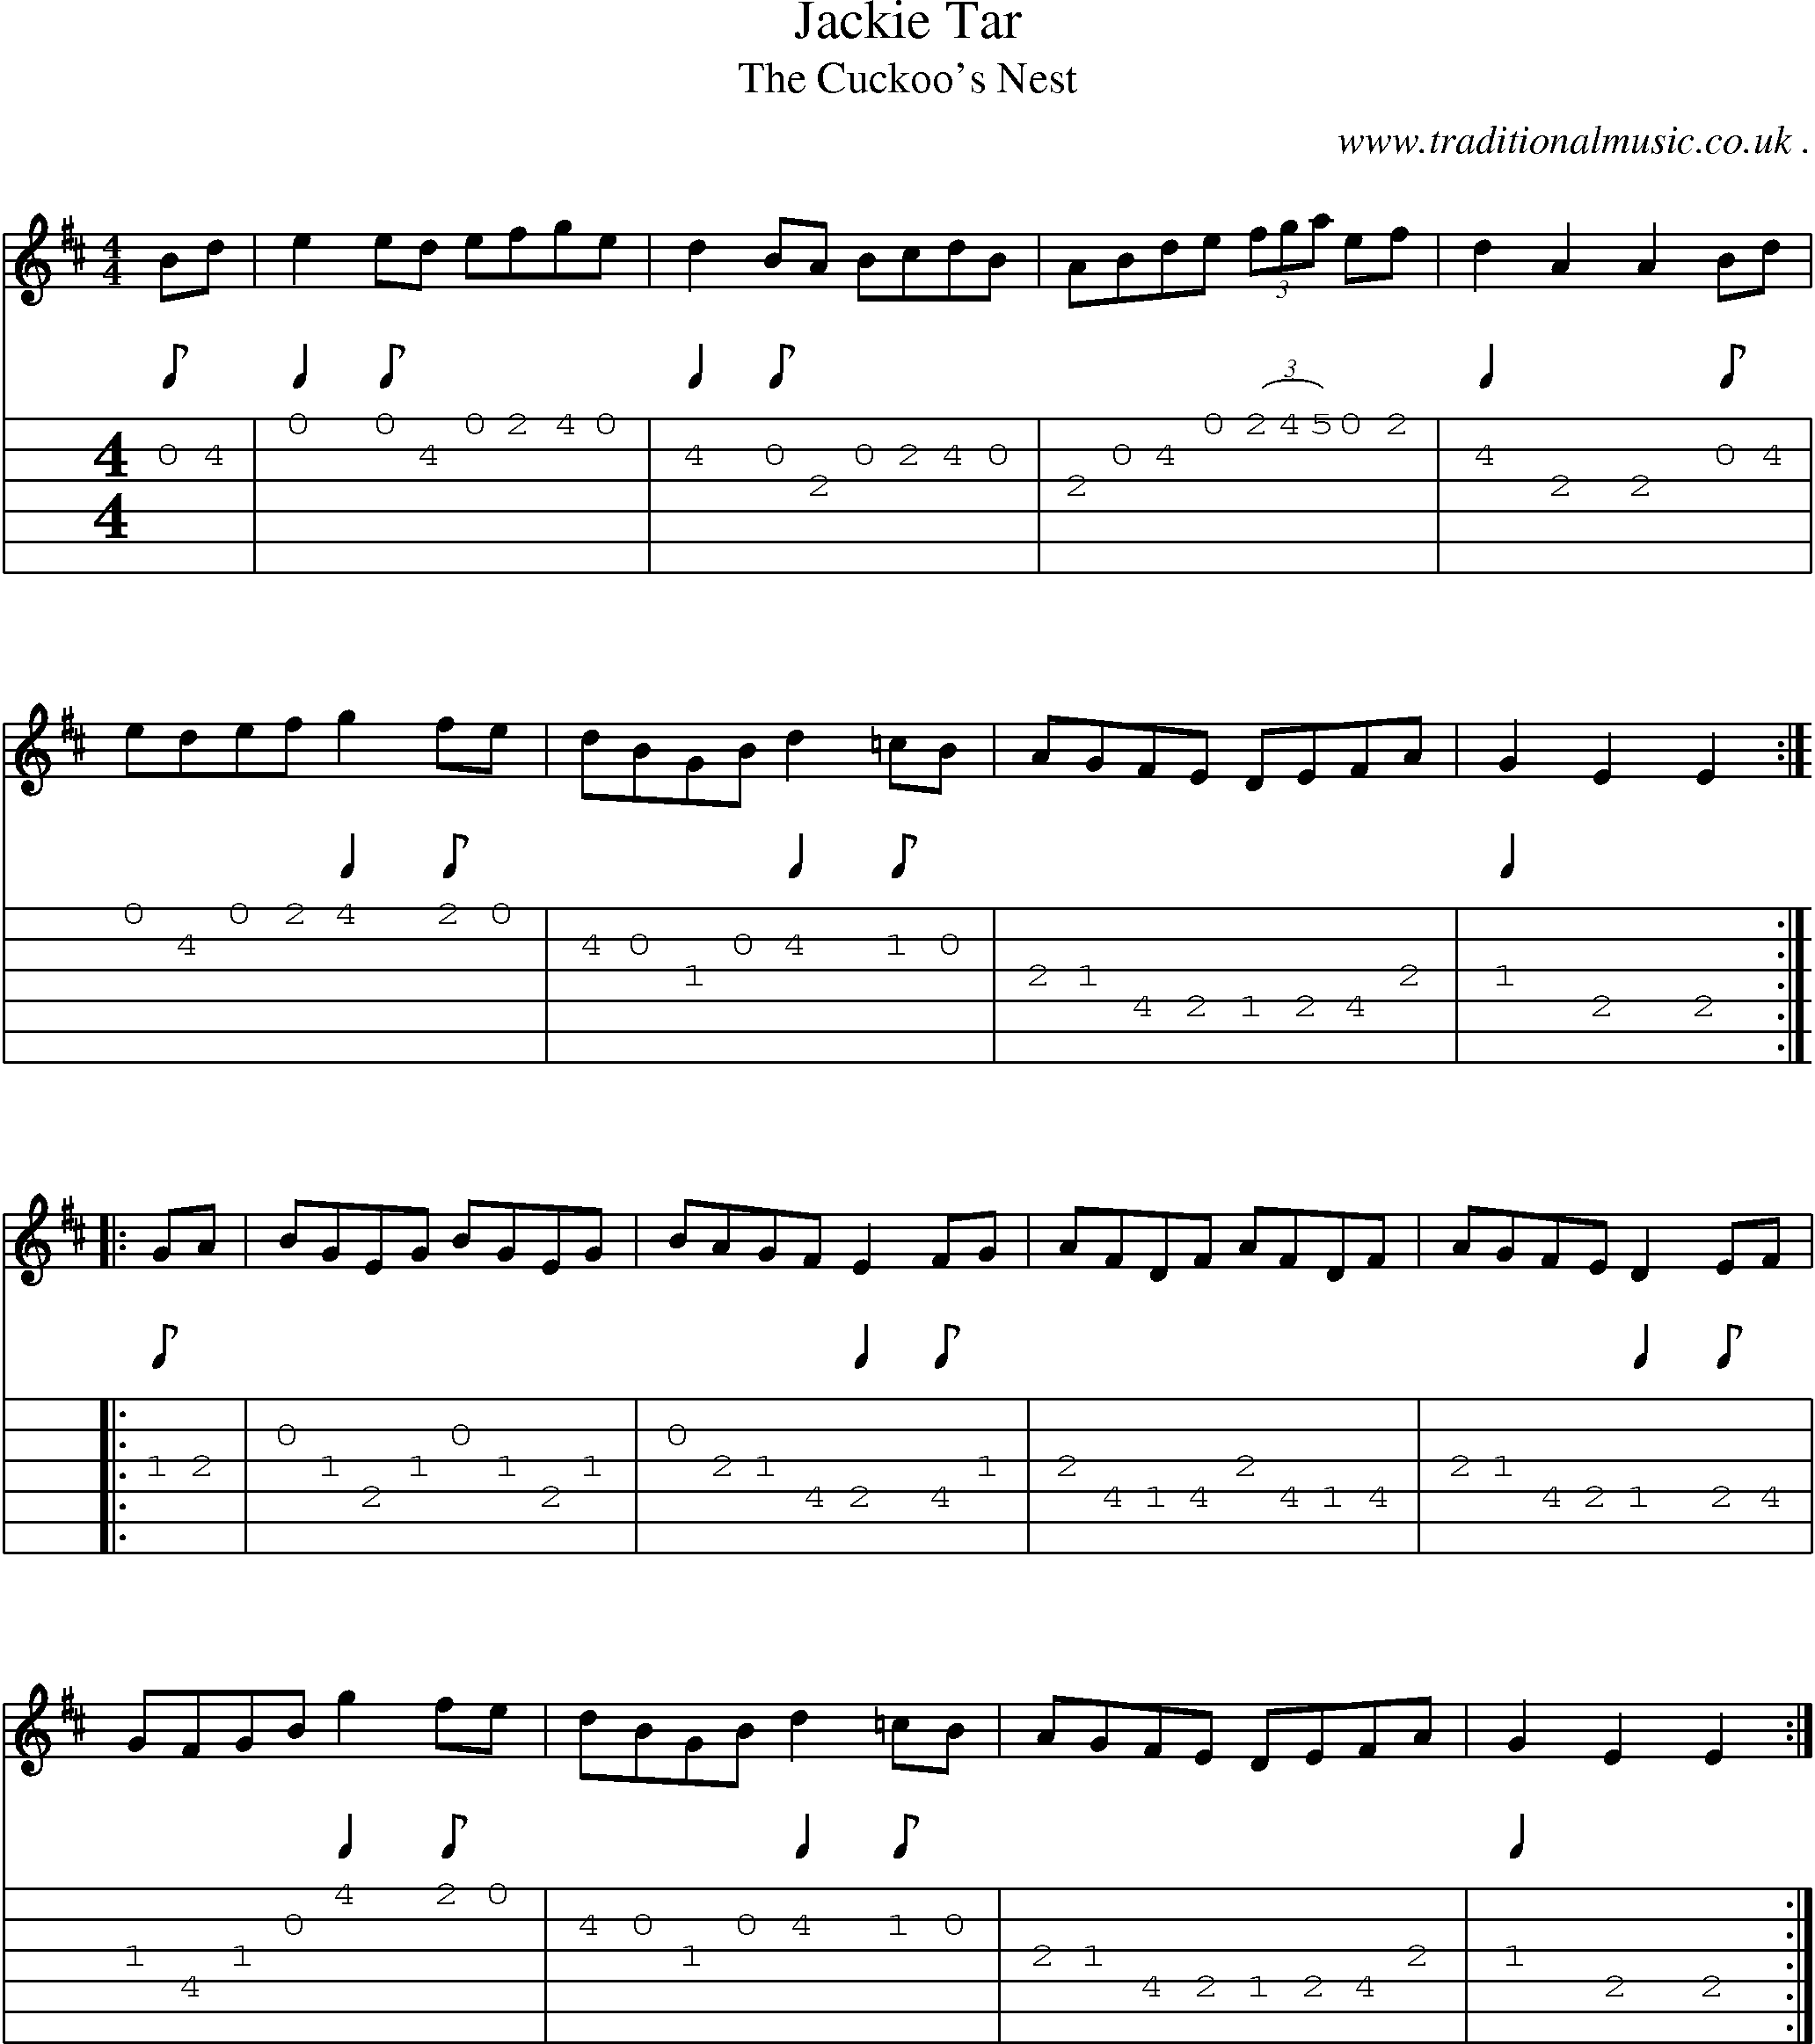 Sheet-Music and Guitar Tabs for Jackie Tar